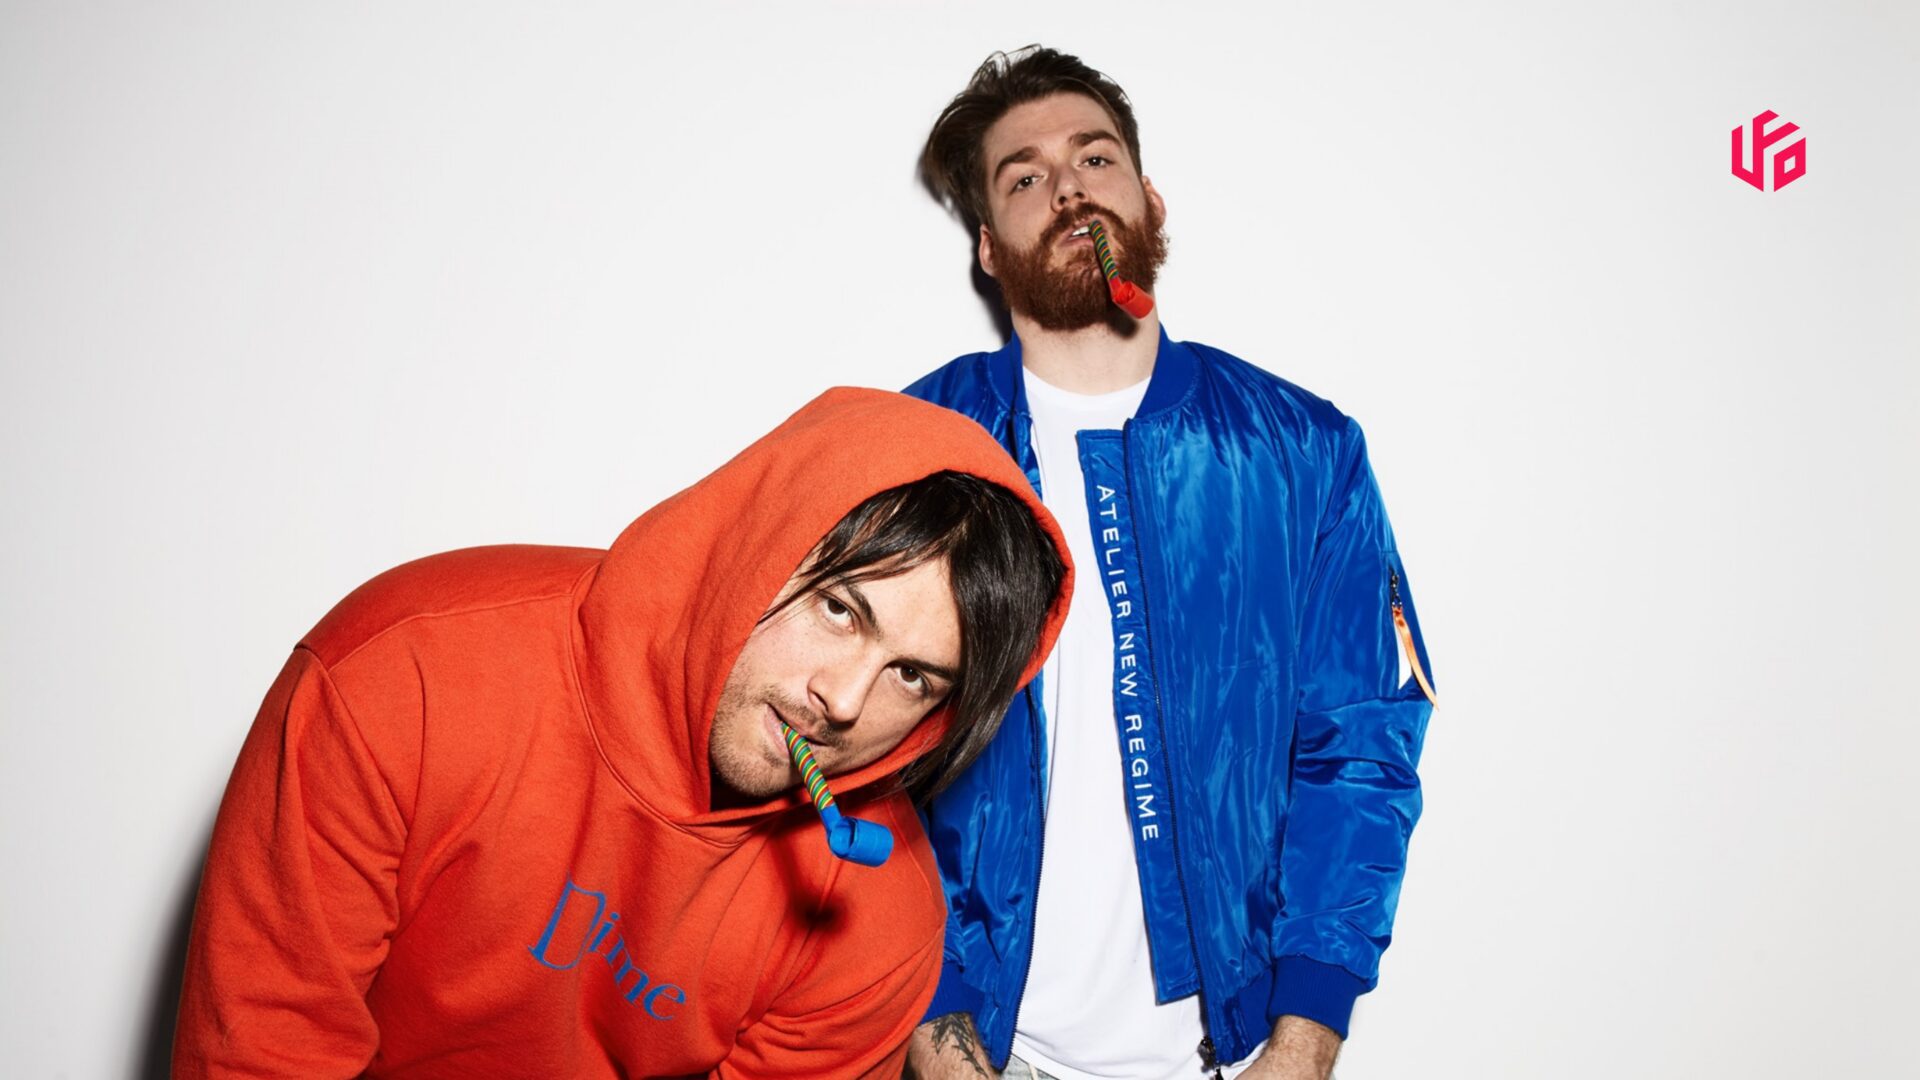 Adventure Club Make Triumphant Return With First Album In 6 Years &Quot;Love // Chaos&Quot;